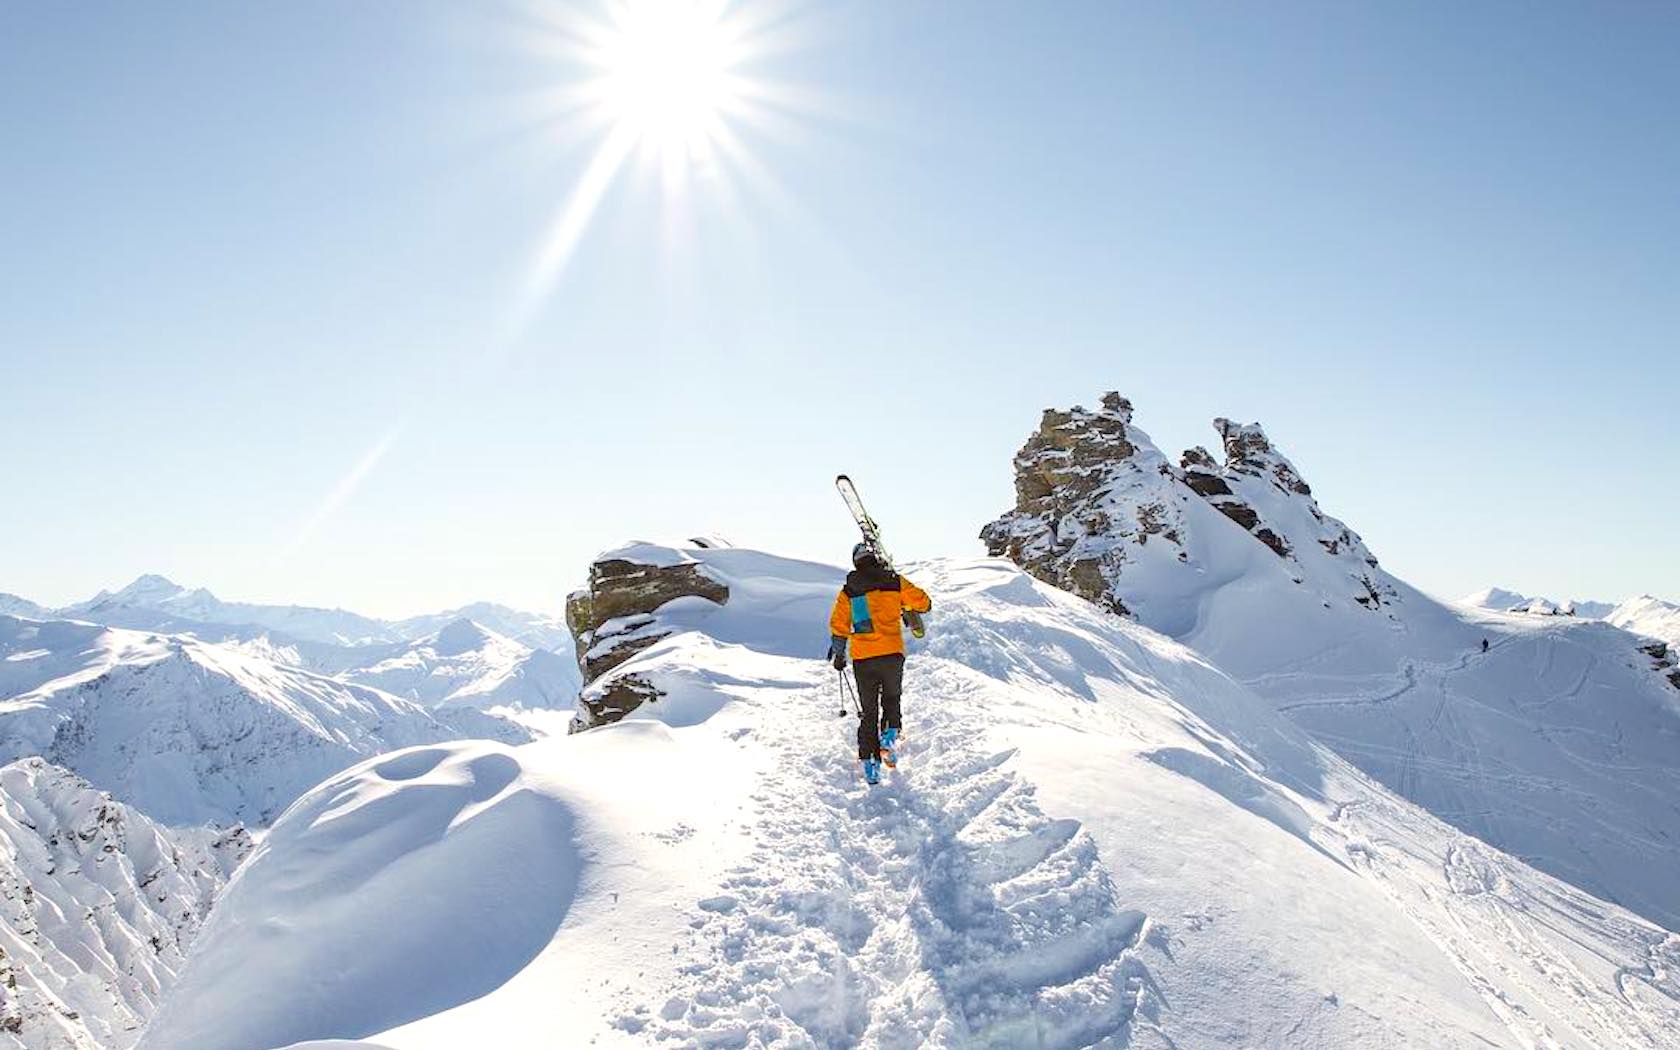 A skier walking up a snowy mountain carrying skies